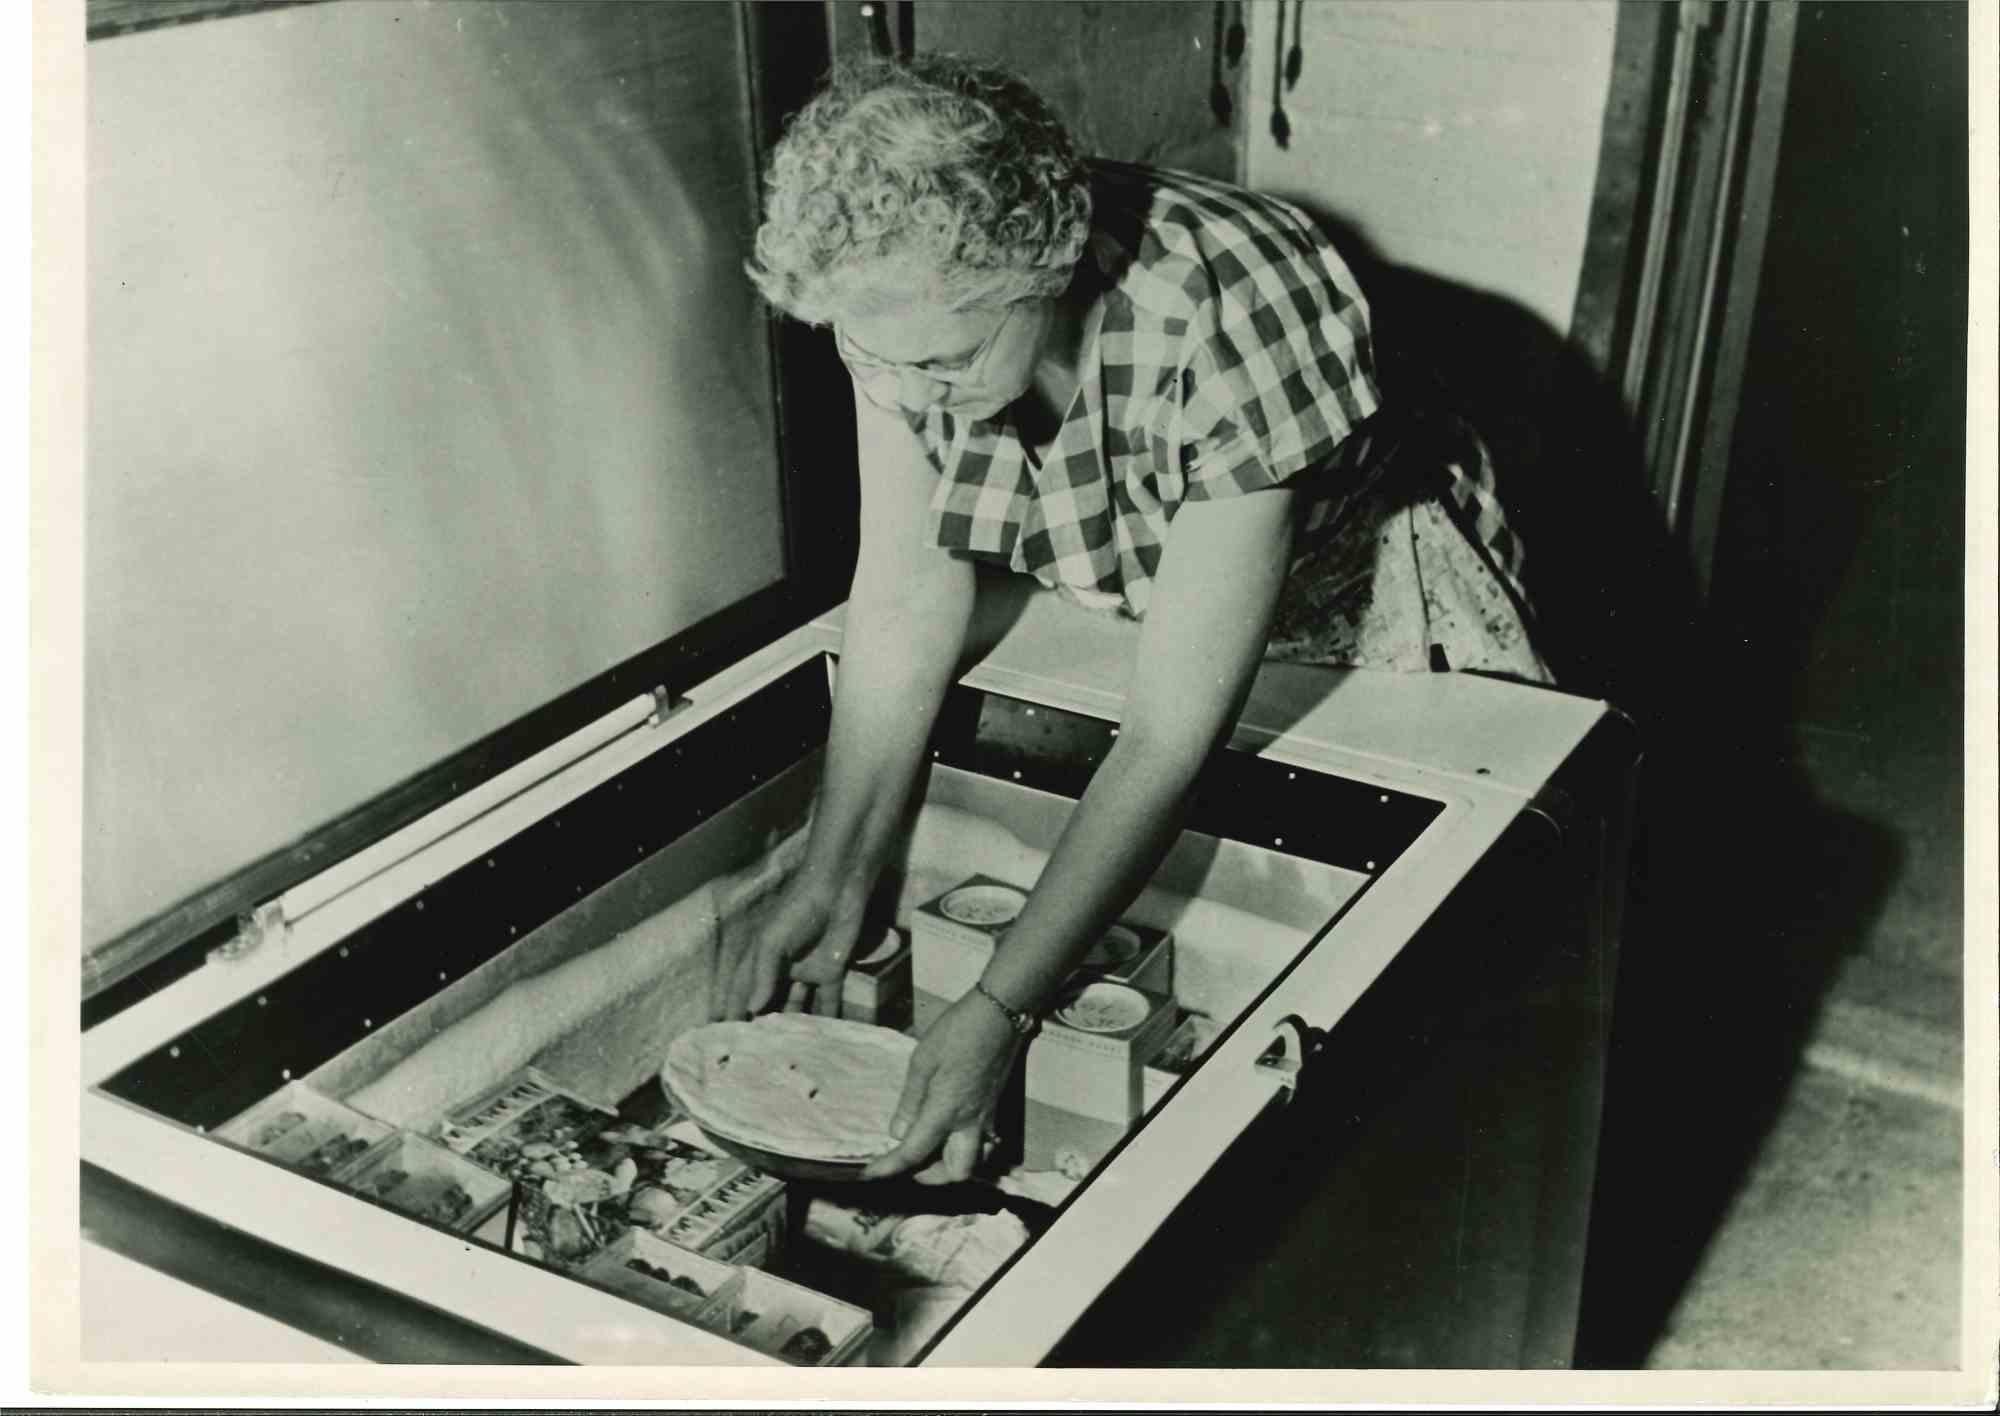 Unknown Figurative Photograph - Frozen Food Industry - American Vintage Photograph - Mid 20th Century